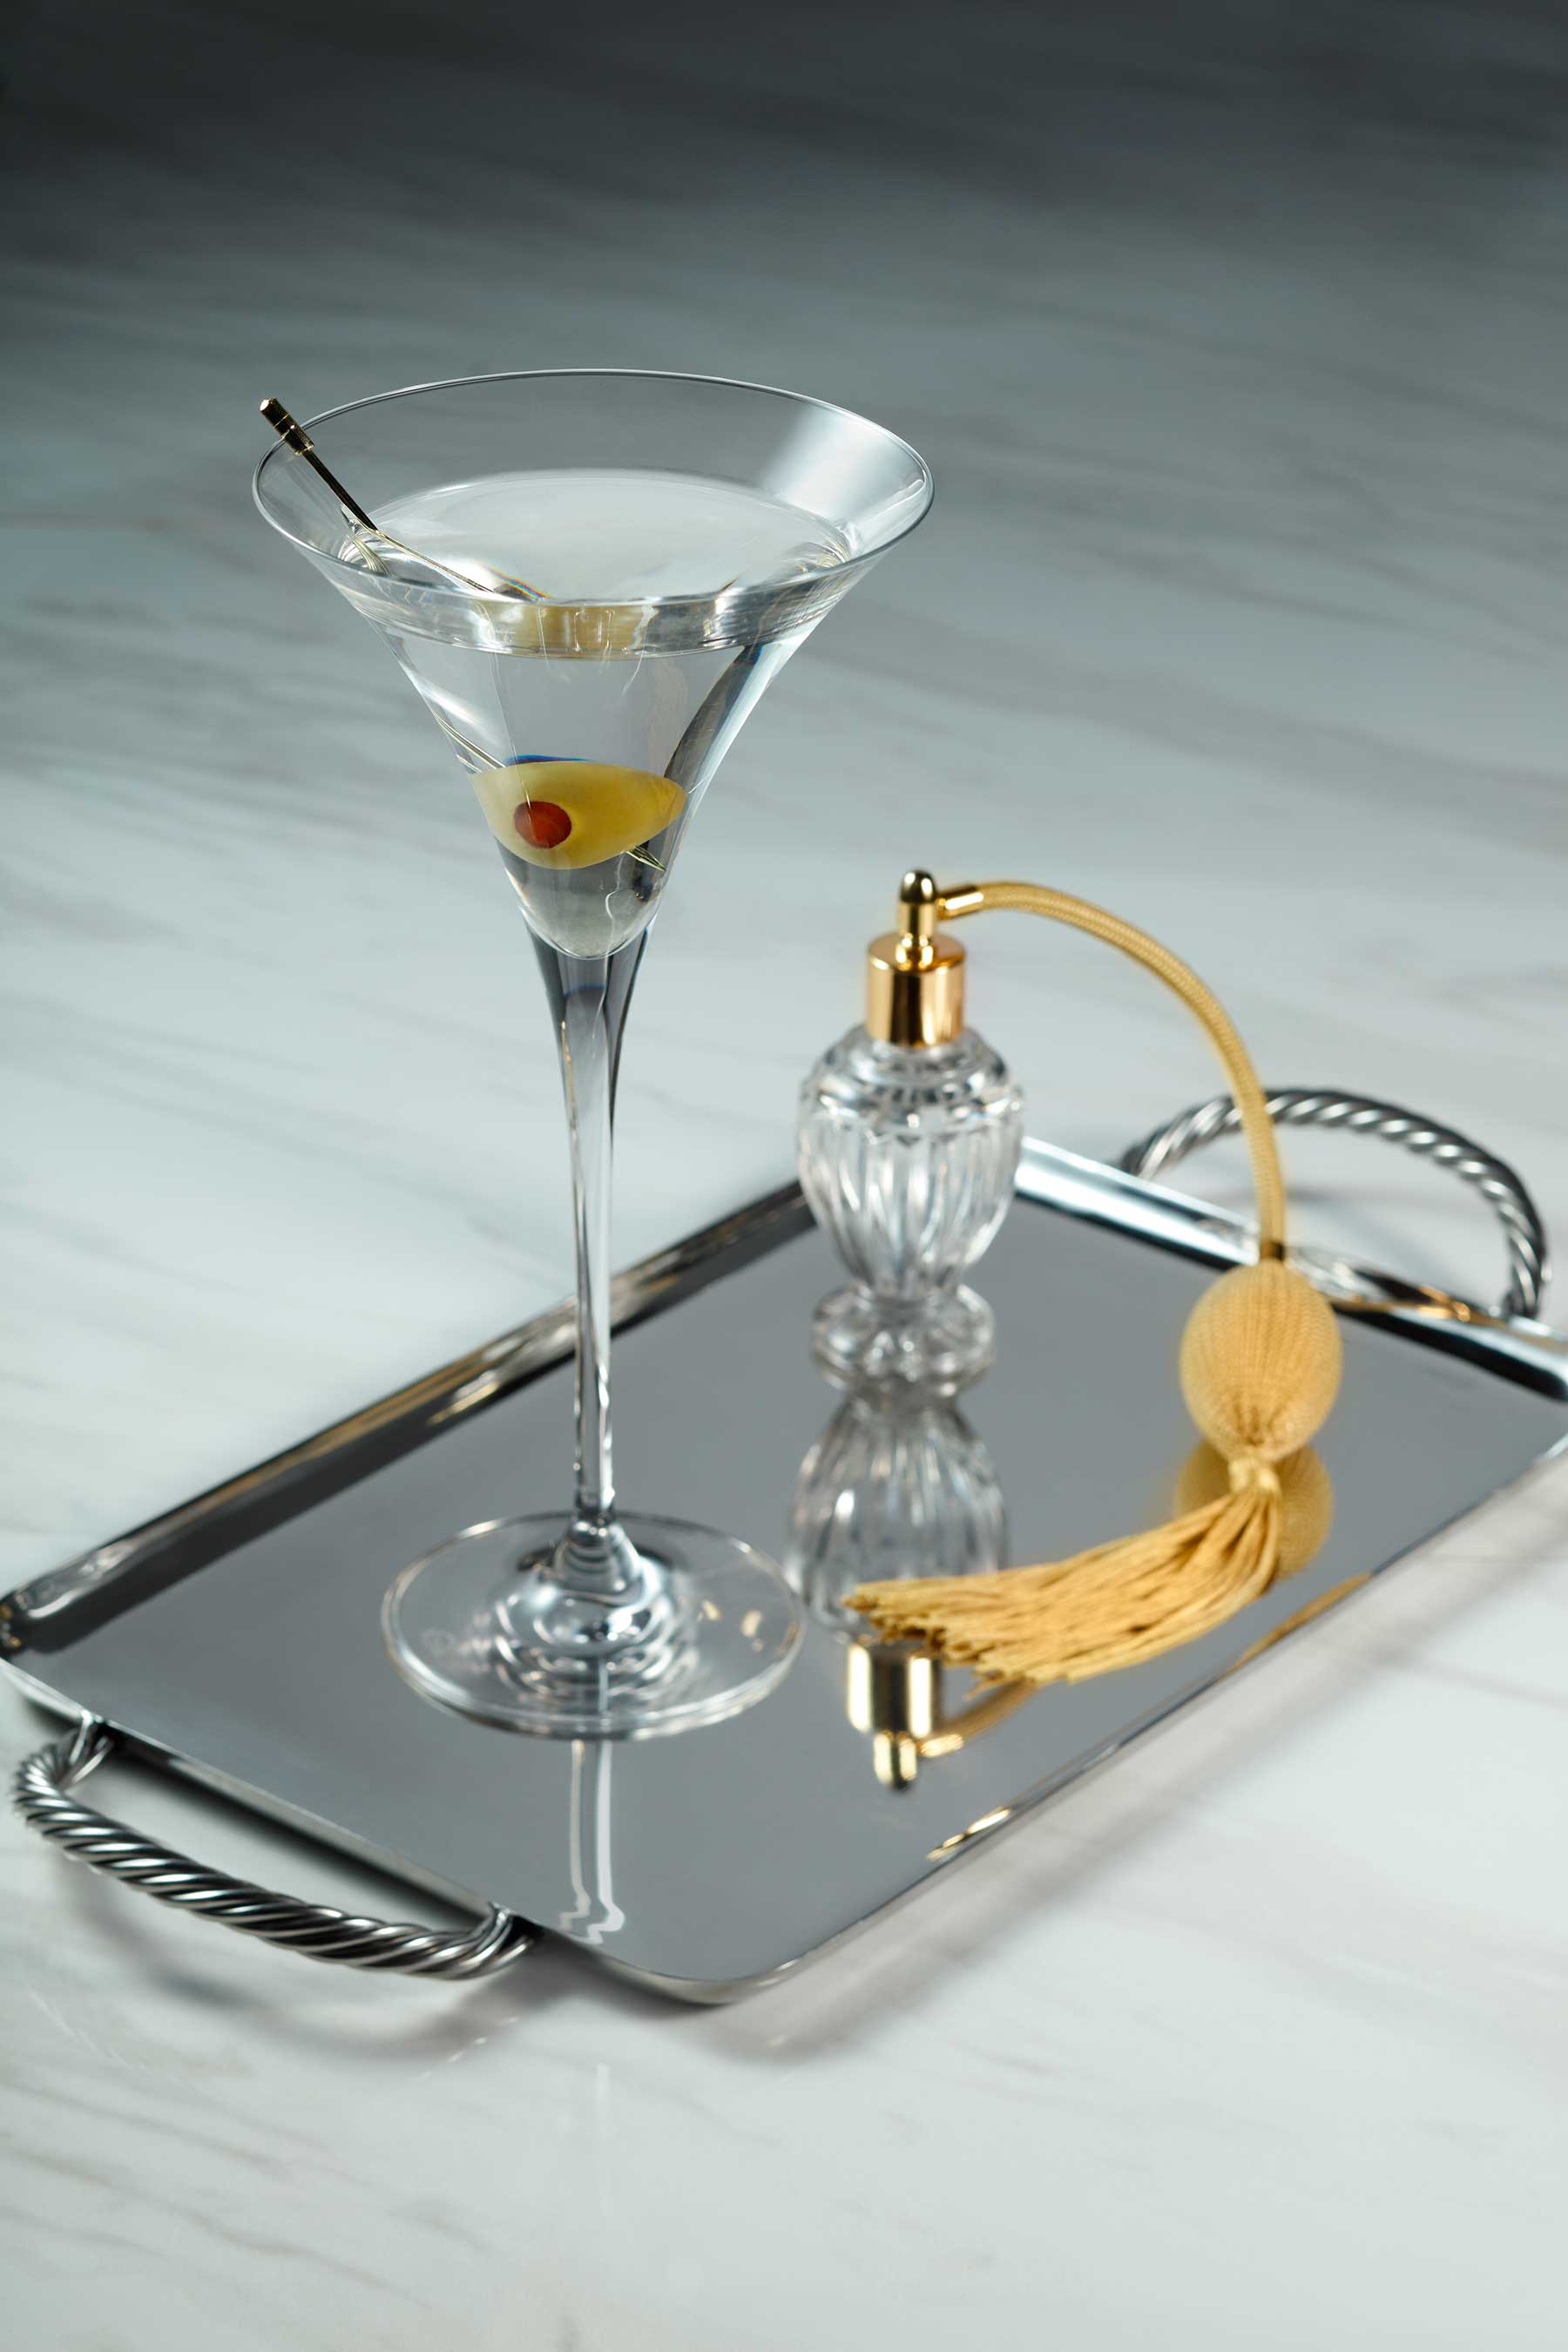 The Mayfair Supper Club’s classic Martini at Bellagio served with a choice of olives, twist or onion.